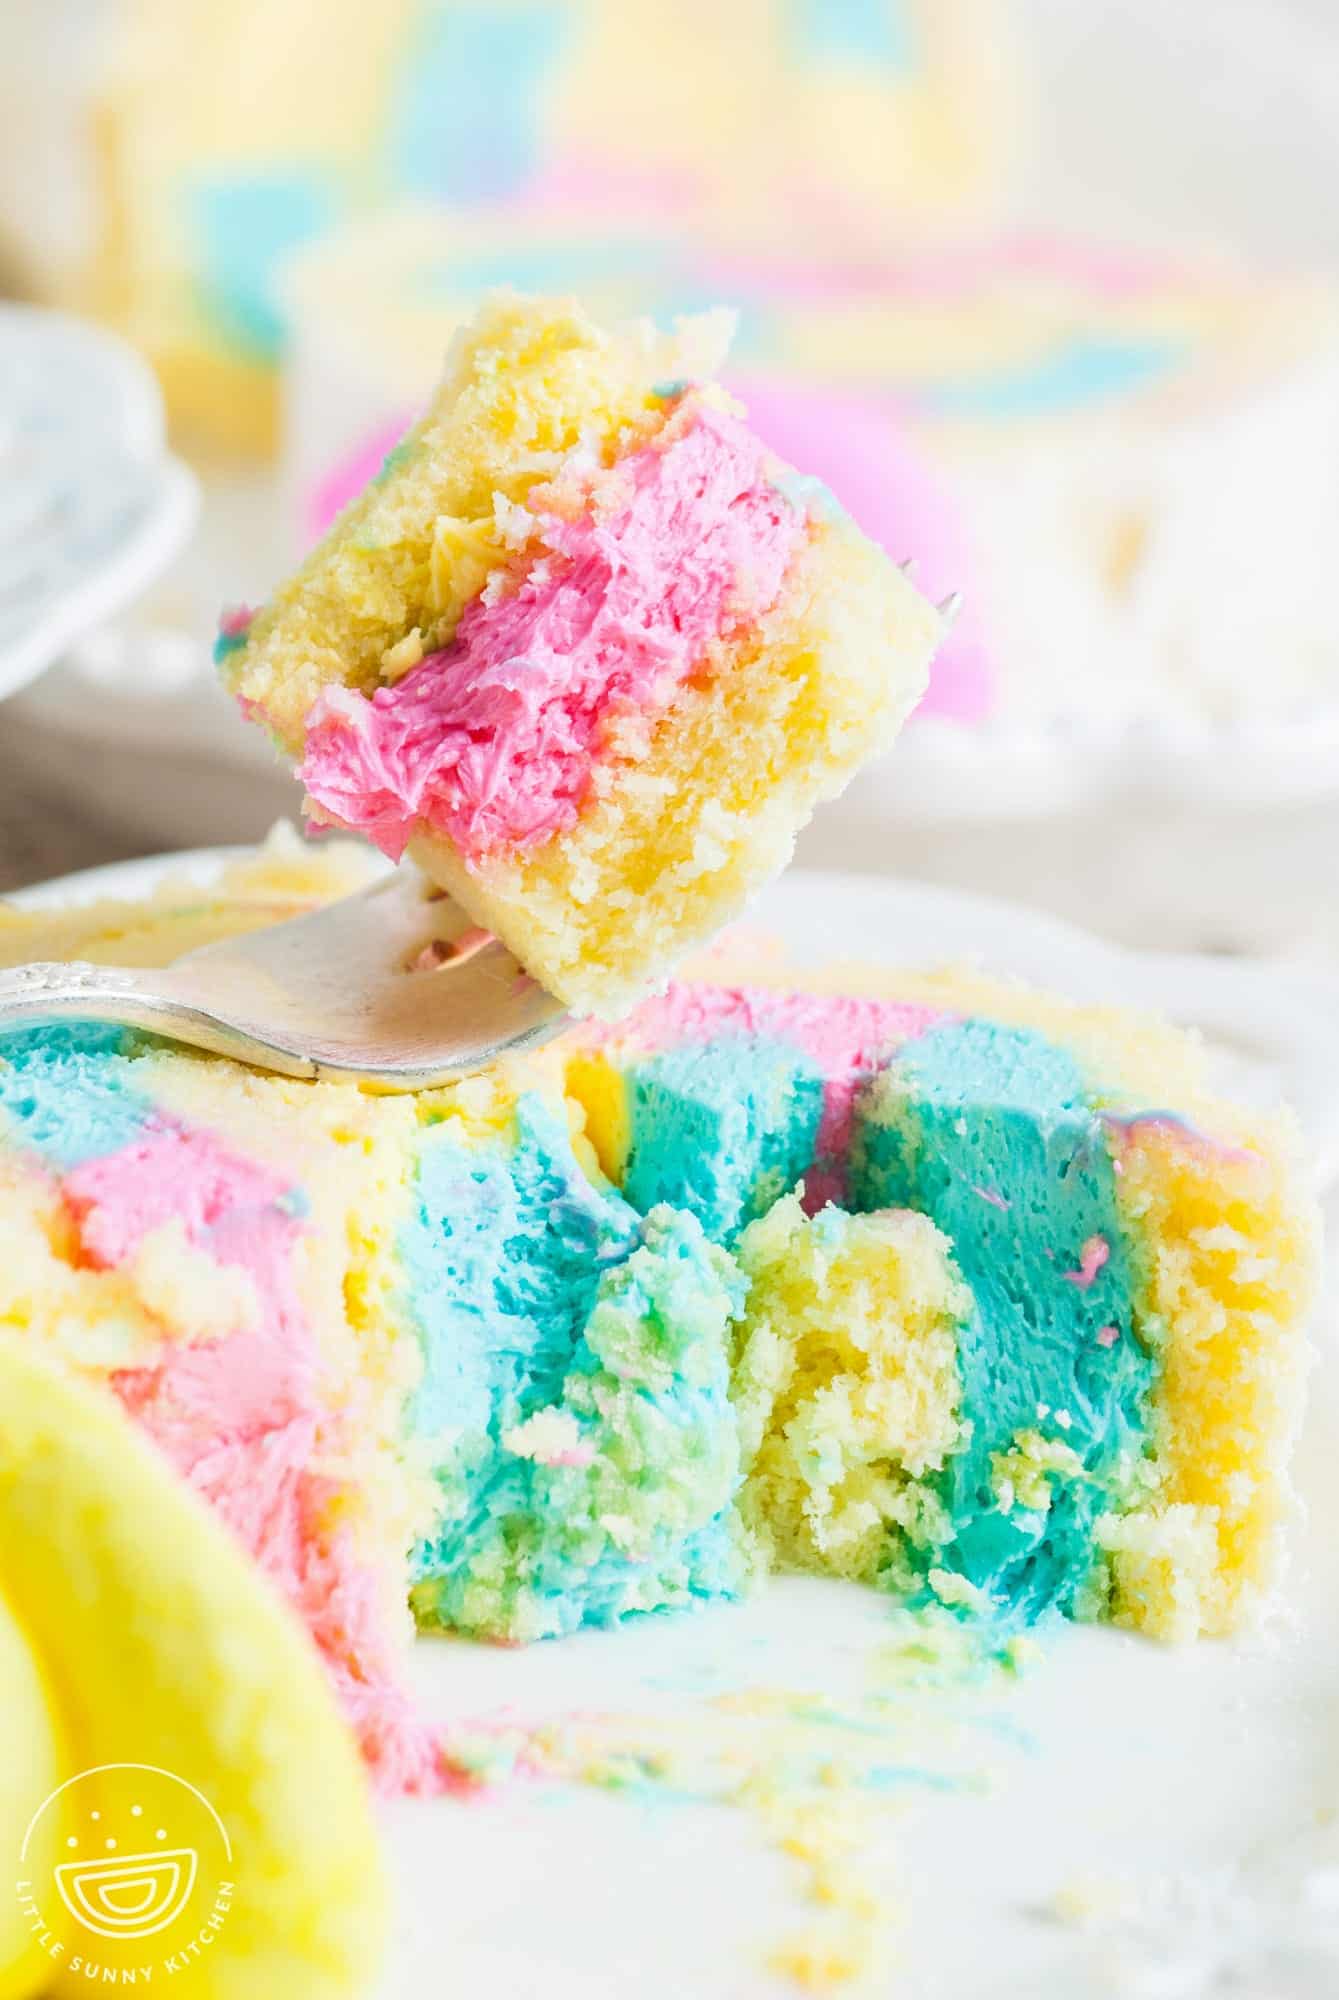 a fork holding a bite of spongy easter cake.